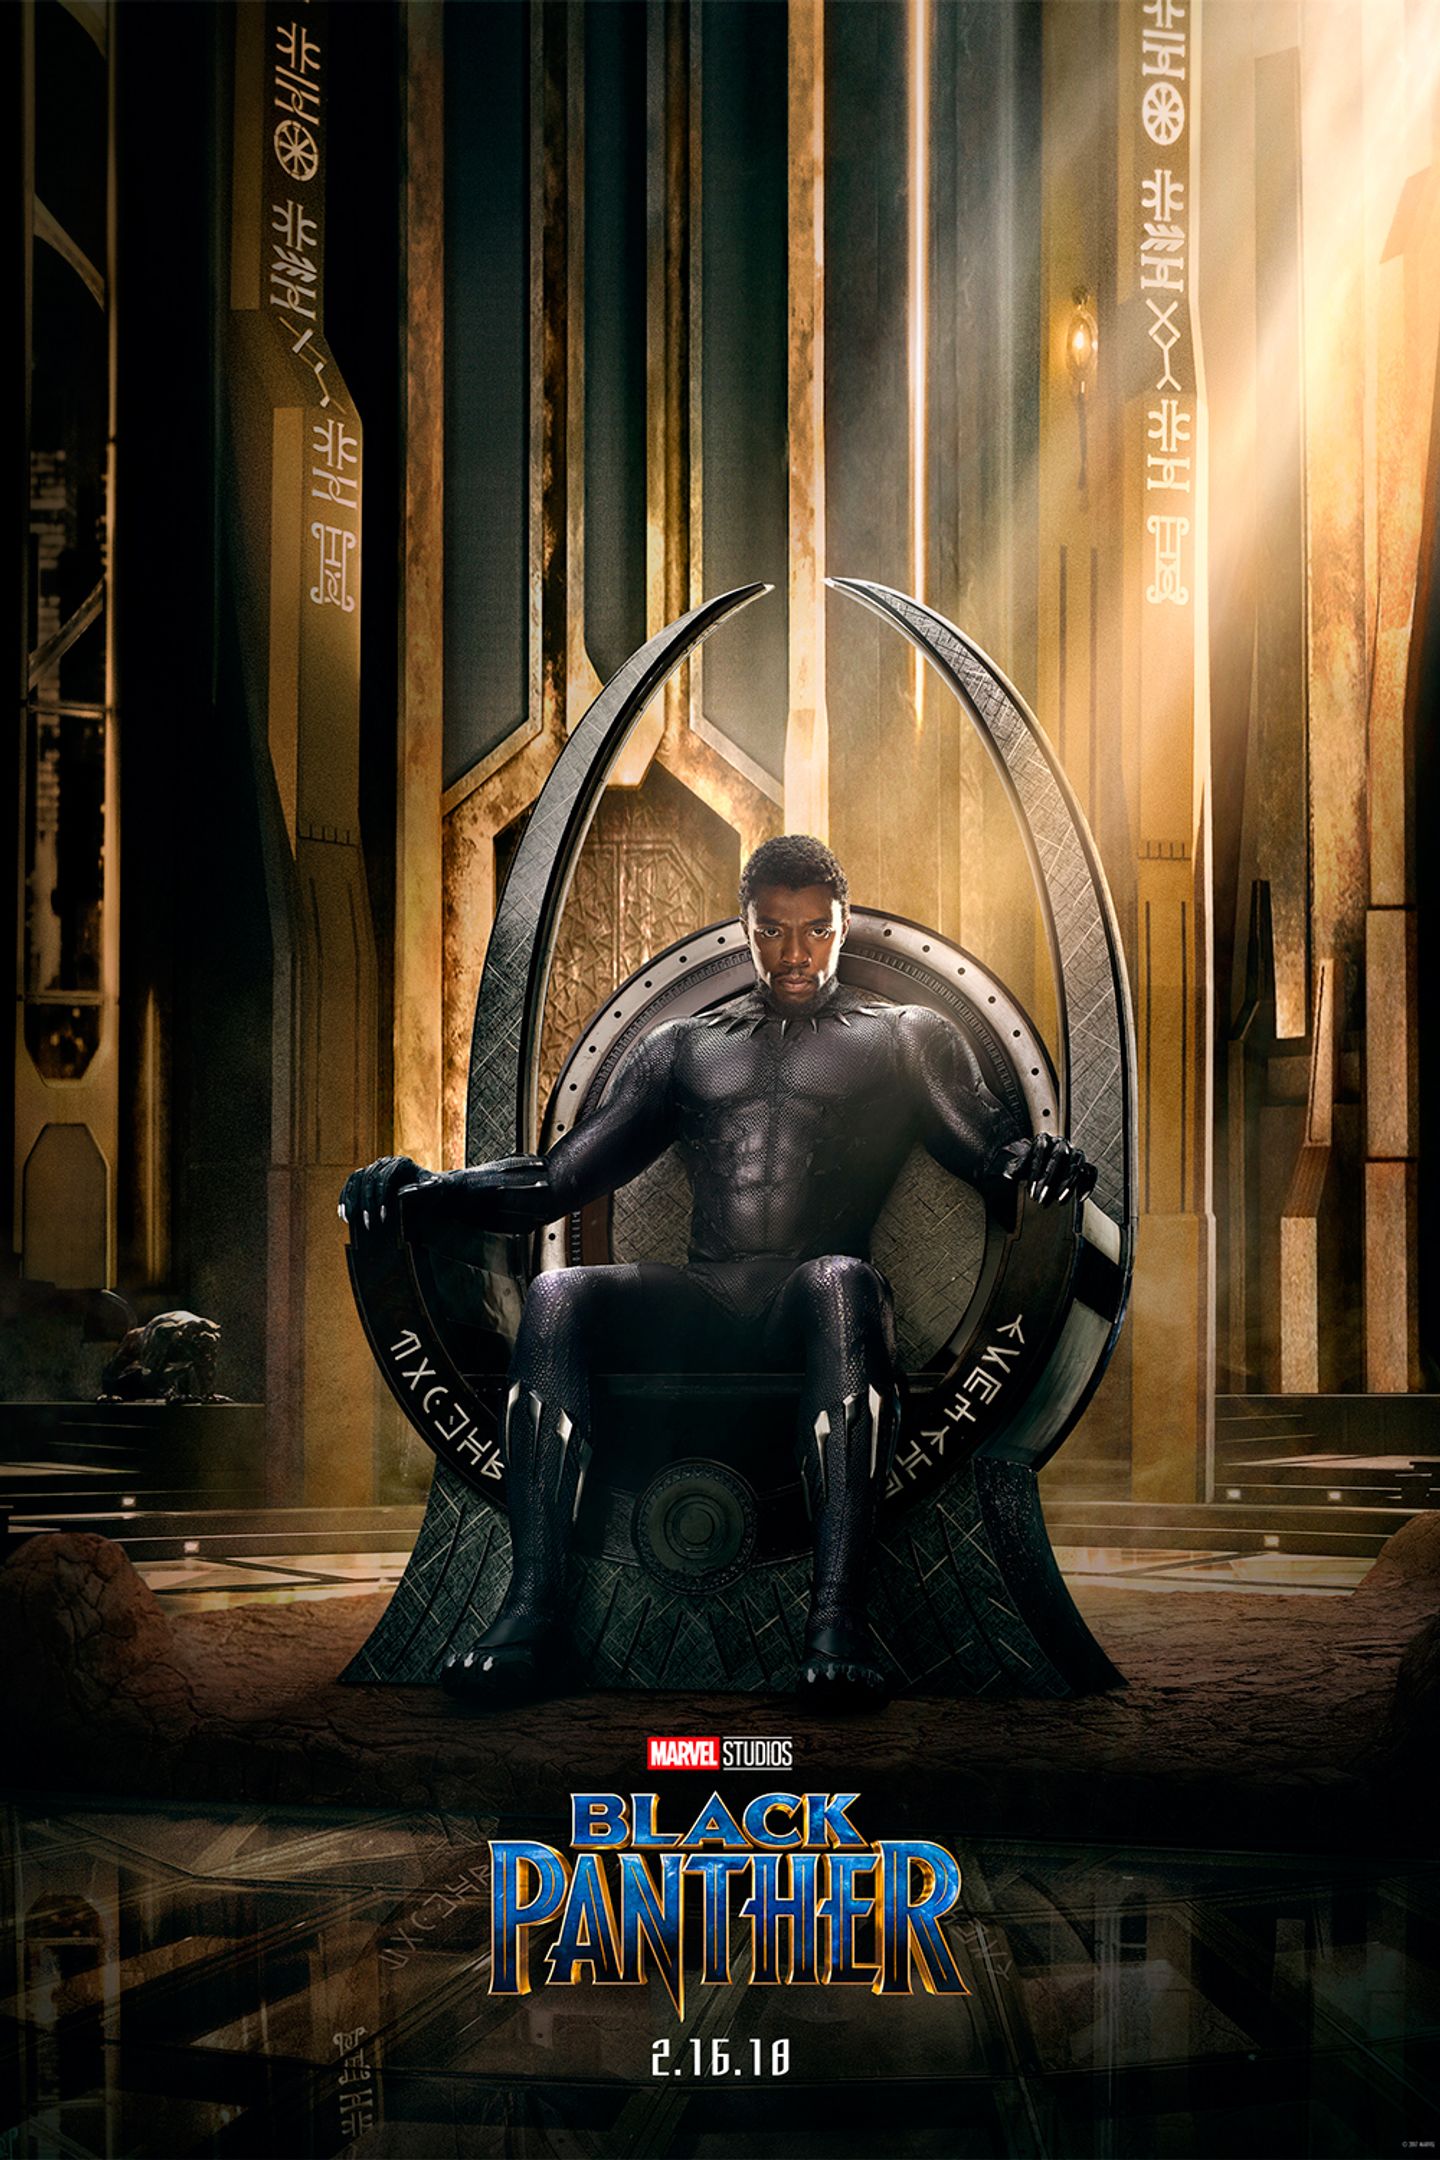 Plakat for 'Black Panther'